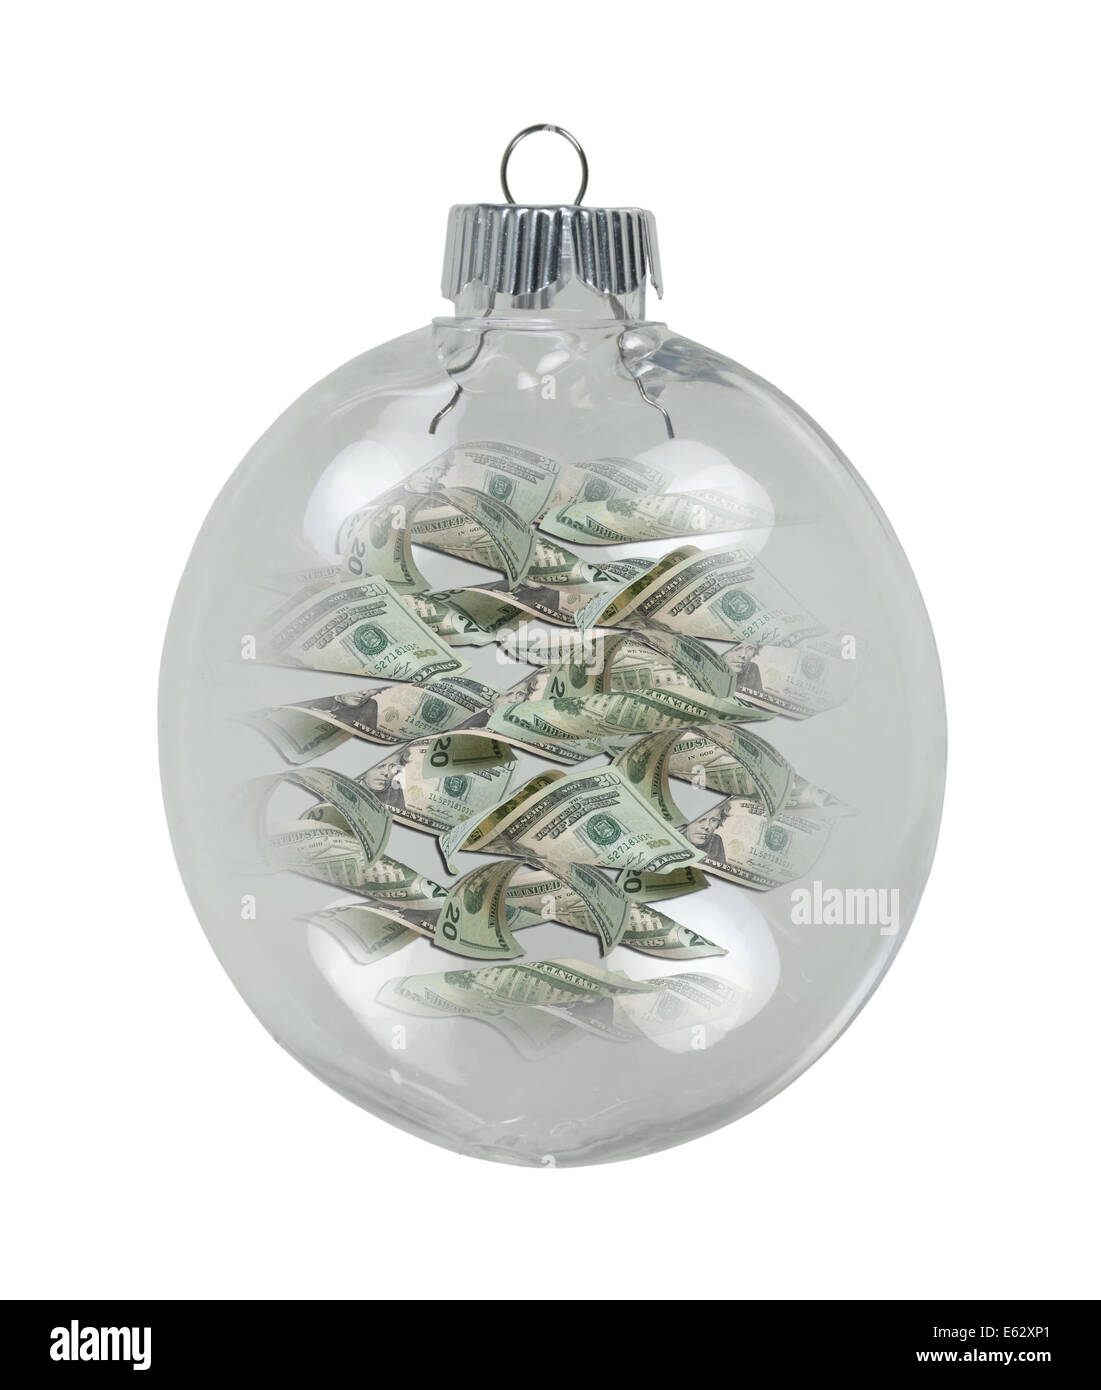 Round Christmas Ornament filled with money for the winter season - path included Stock Photo